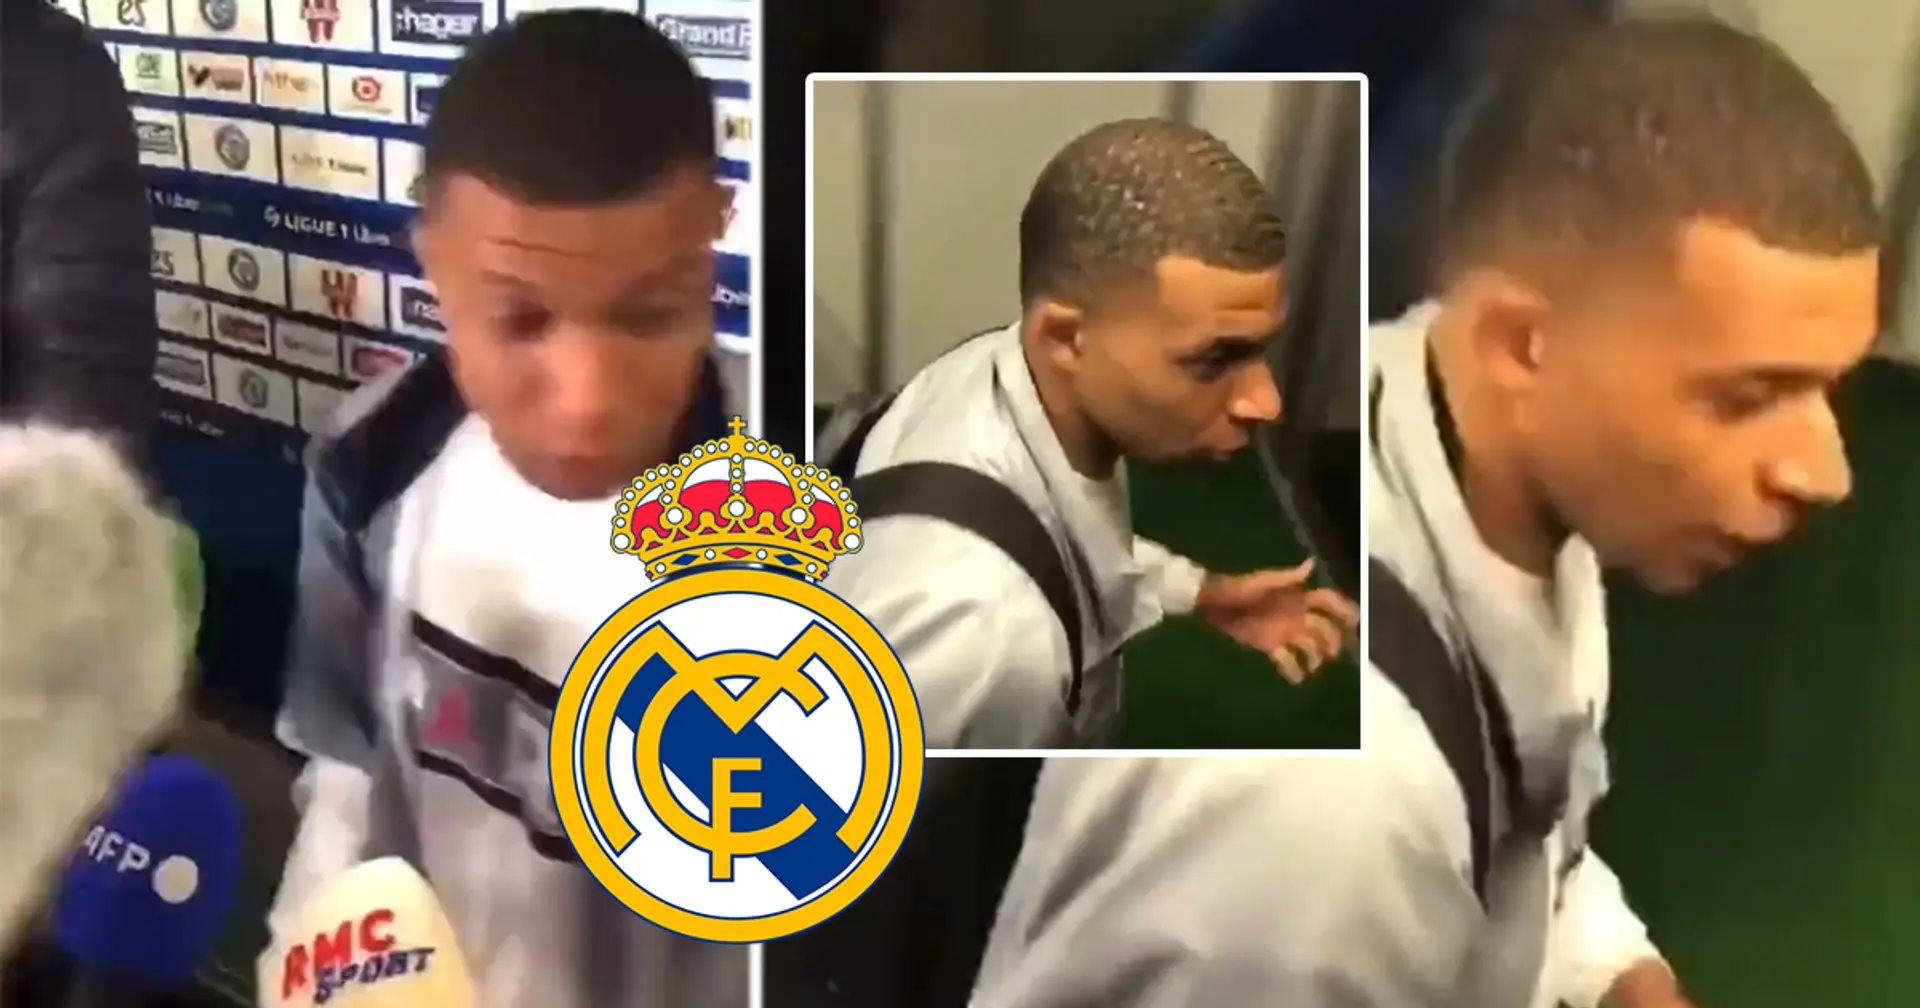 Kylian Mbappe reacts furiously to reporter's question about his future